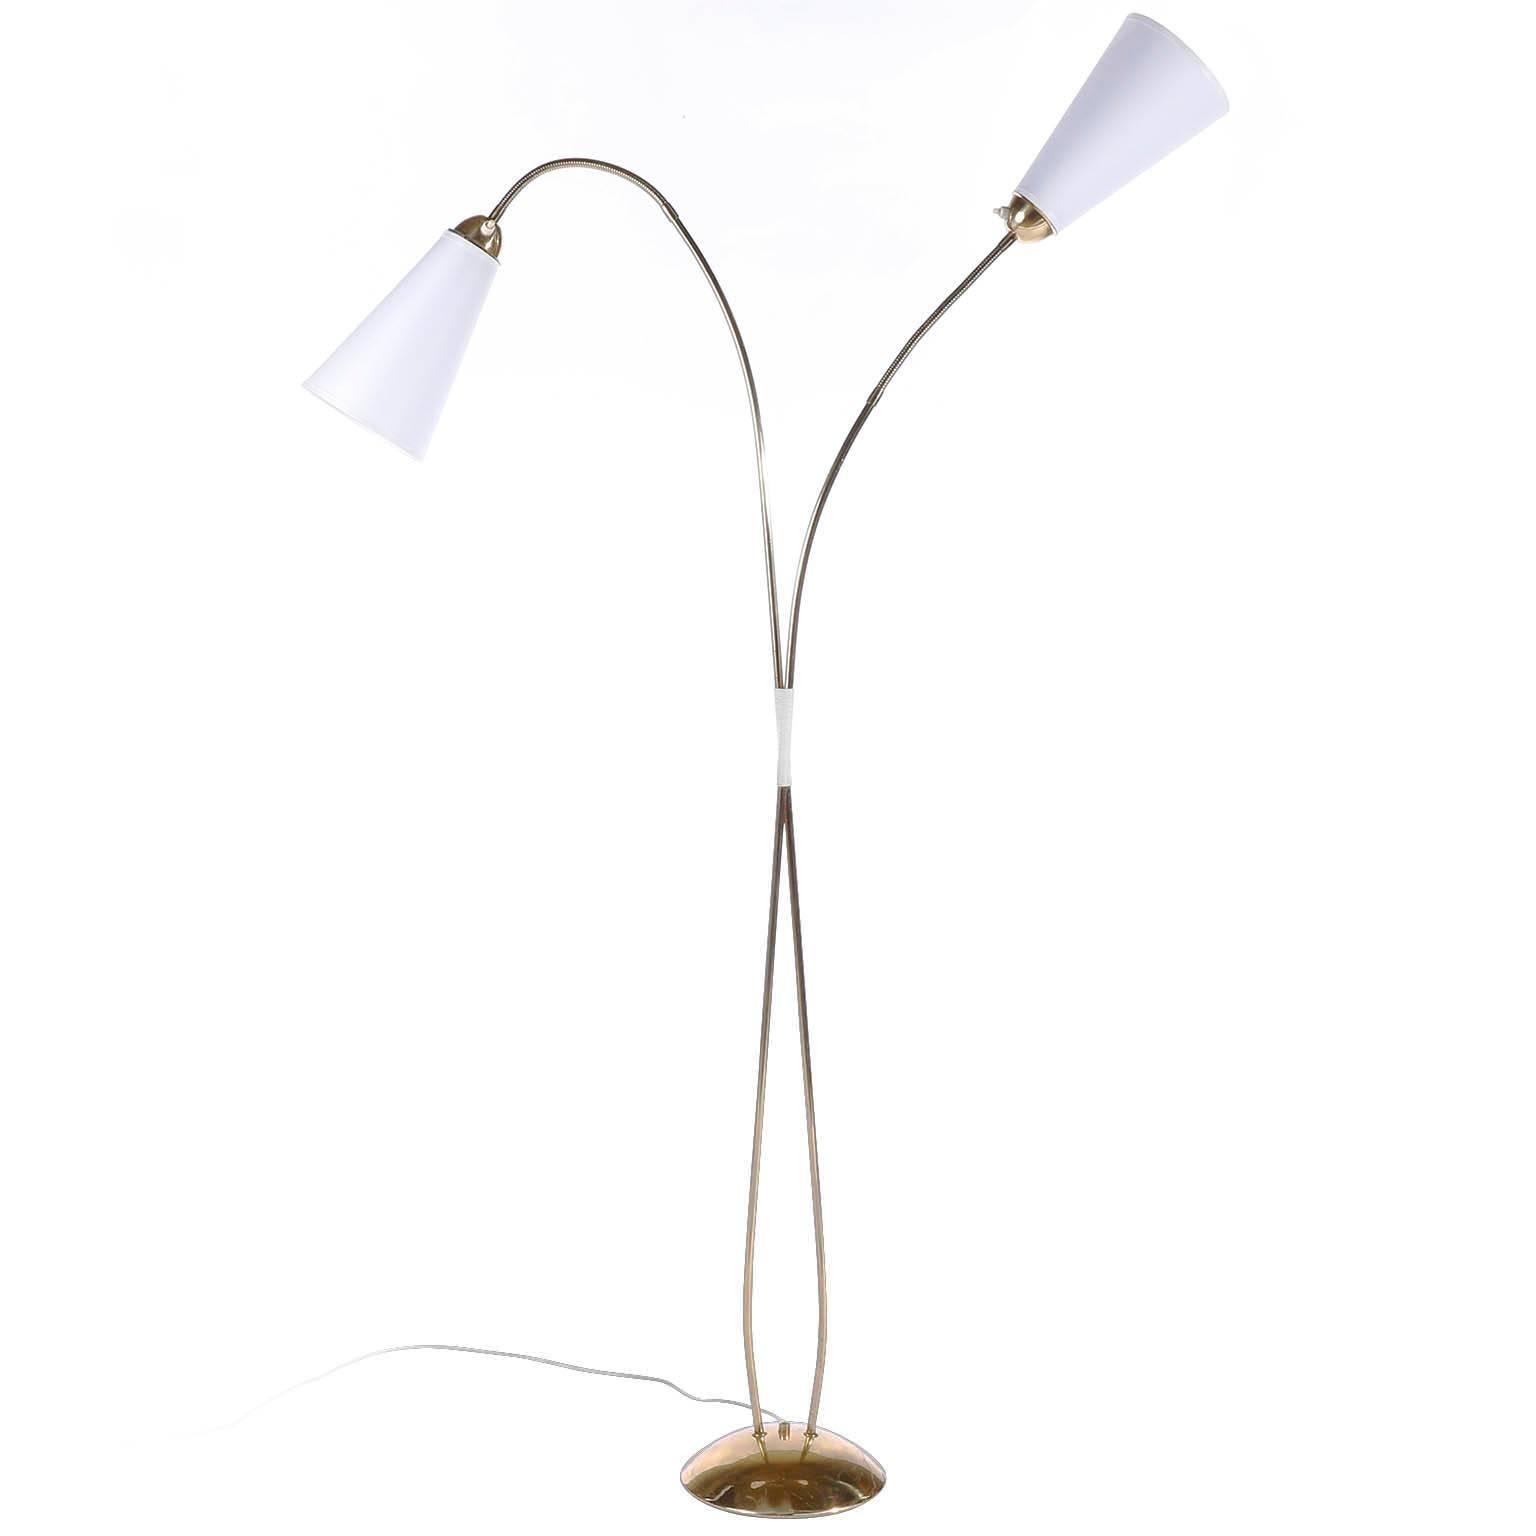 A brass floor lamp with two flexbile arms by Rupert Nikoll, Vienna, Austria, manufactured in Mid-Century, circa 1960 (late 1950s or ealry 1960s).
The stand is made of two curved brass rods with a handle made of a white plastic string. At the end of